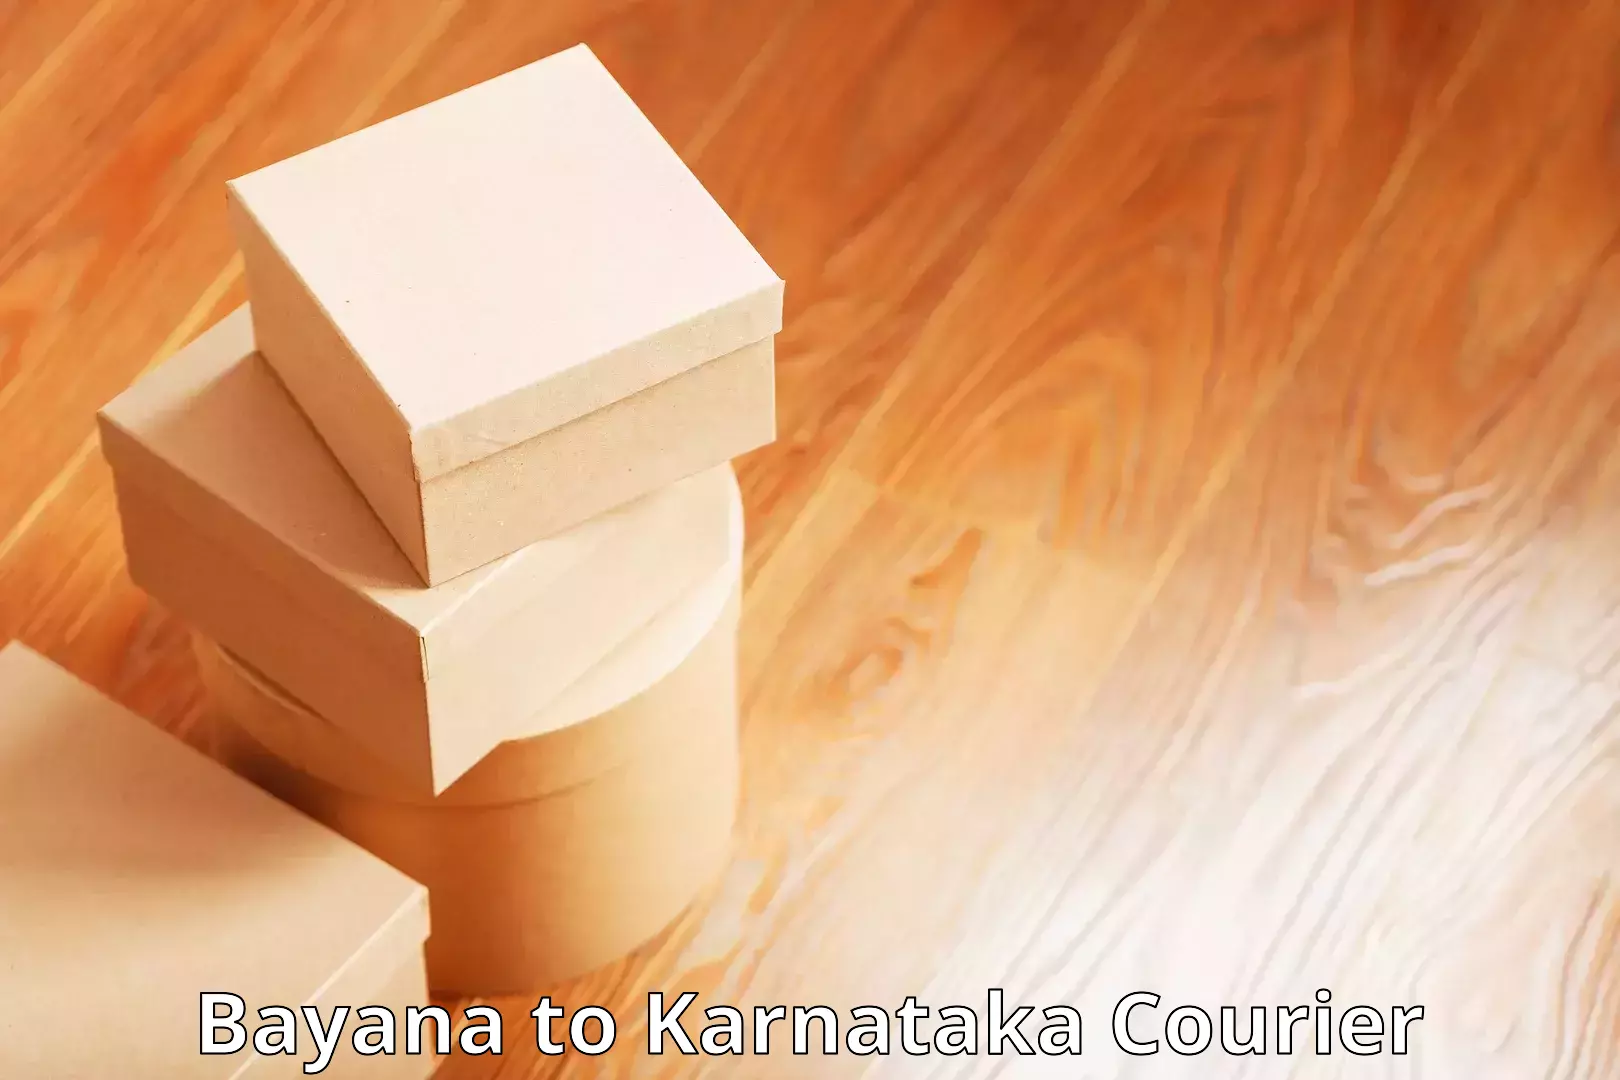 Fast delivery service Bayana to Shorapur